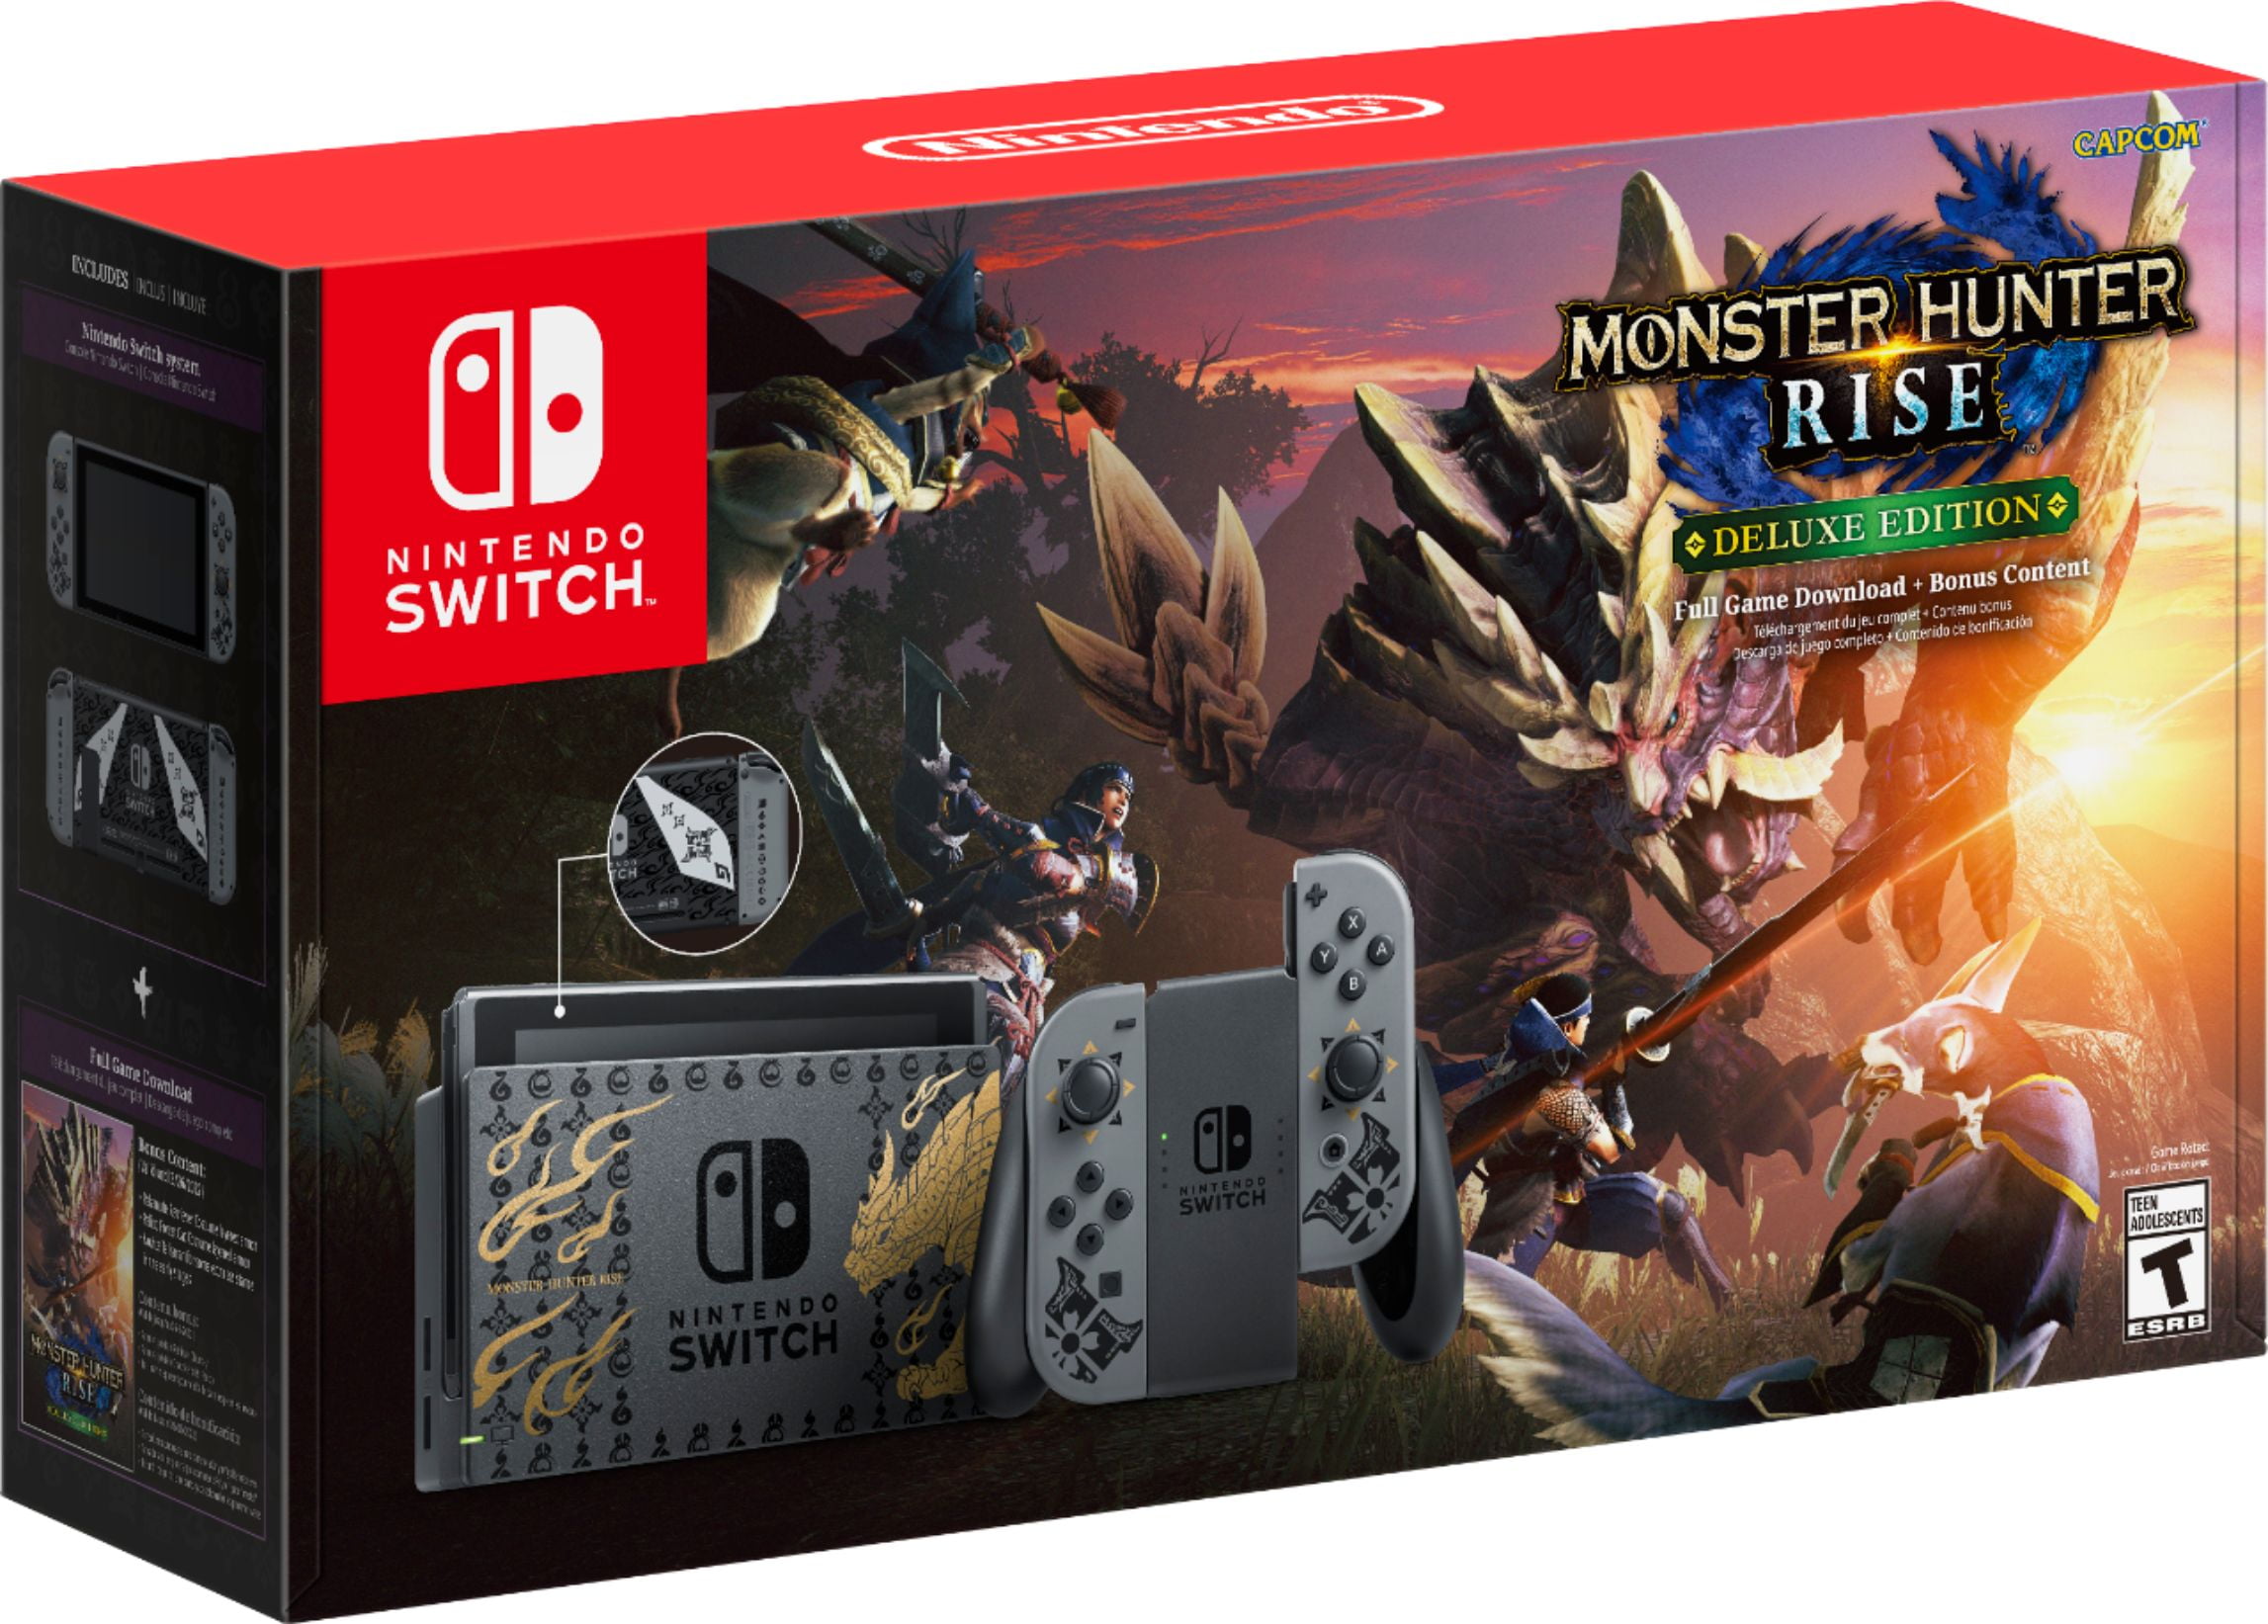 Nintendo Switch MONSTER HUNTER RISE Deluxe Edition System - Gray